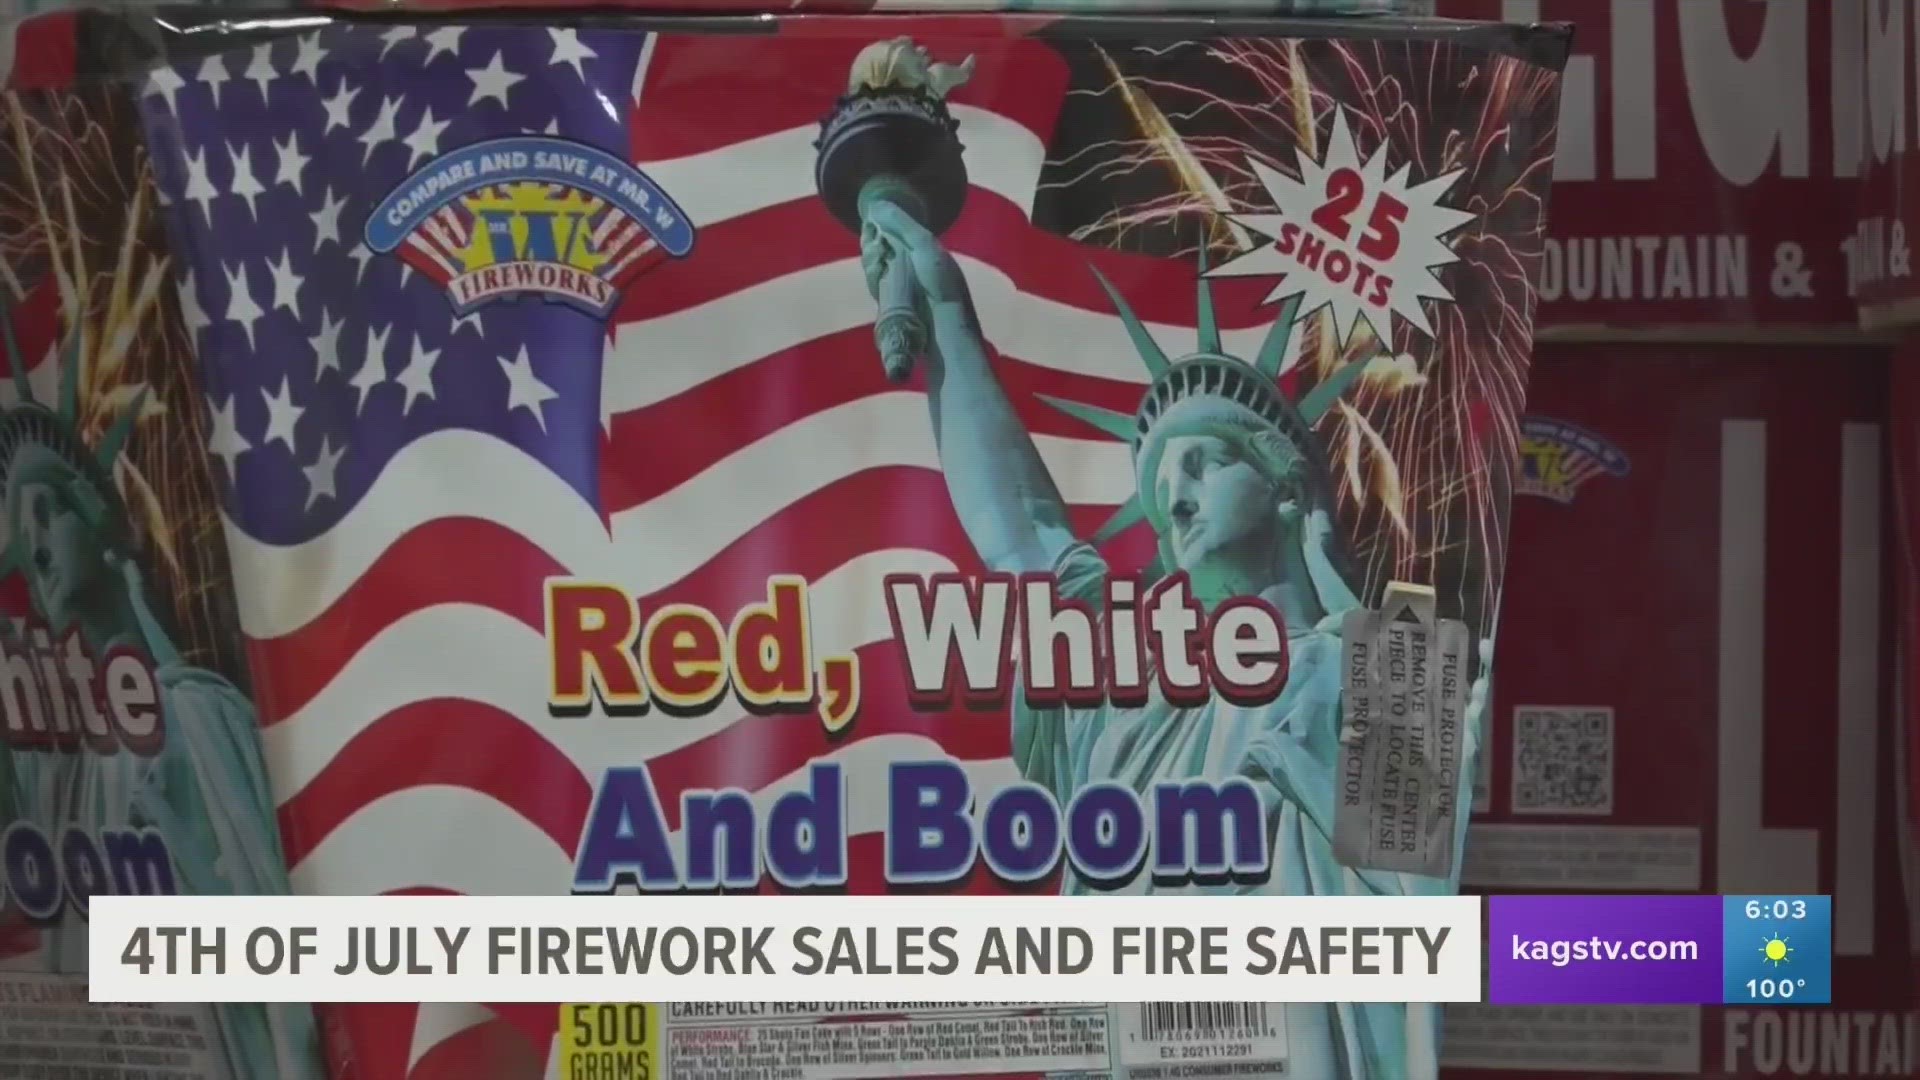 Despite a fireworks ban in both Bryan and College Station, vendors are still seeing sales ahead of the Fourth of July holiday.